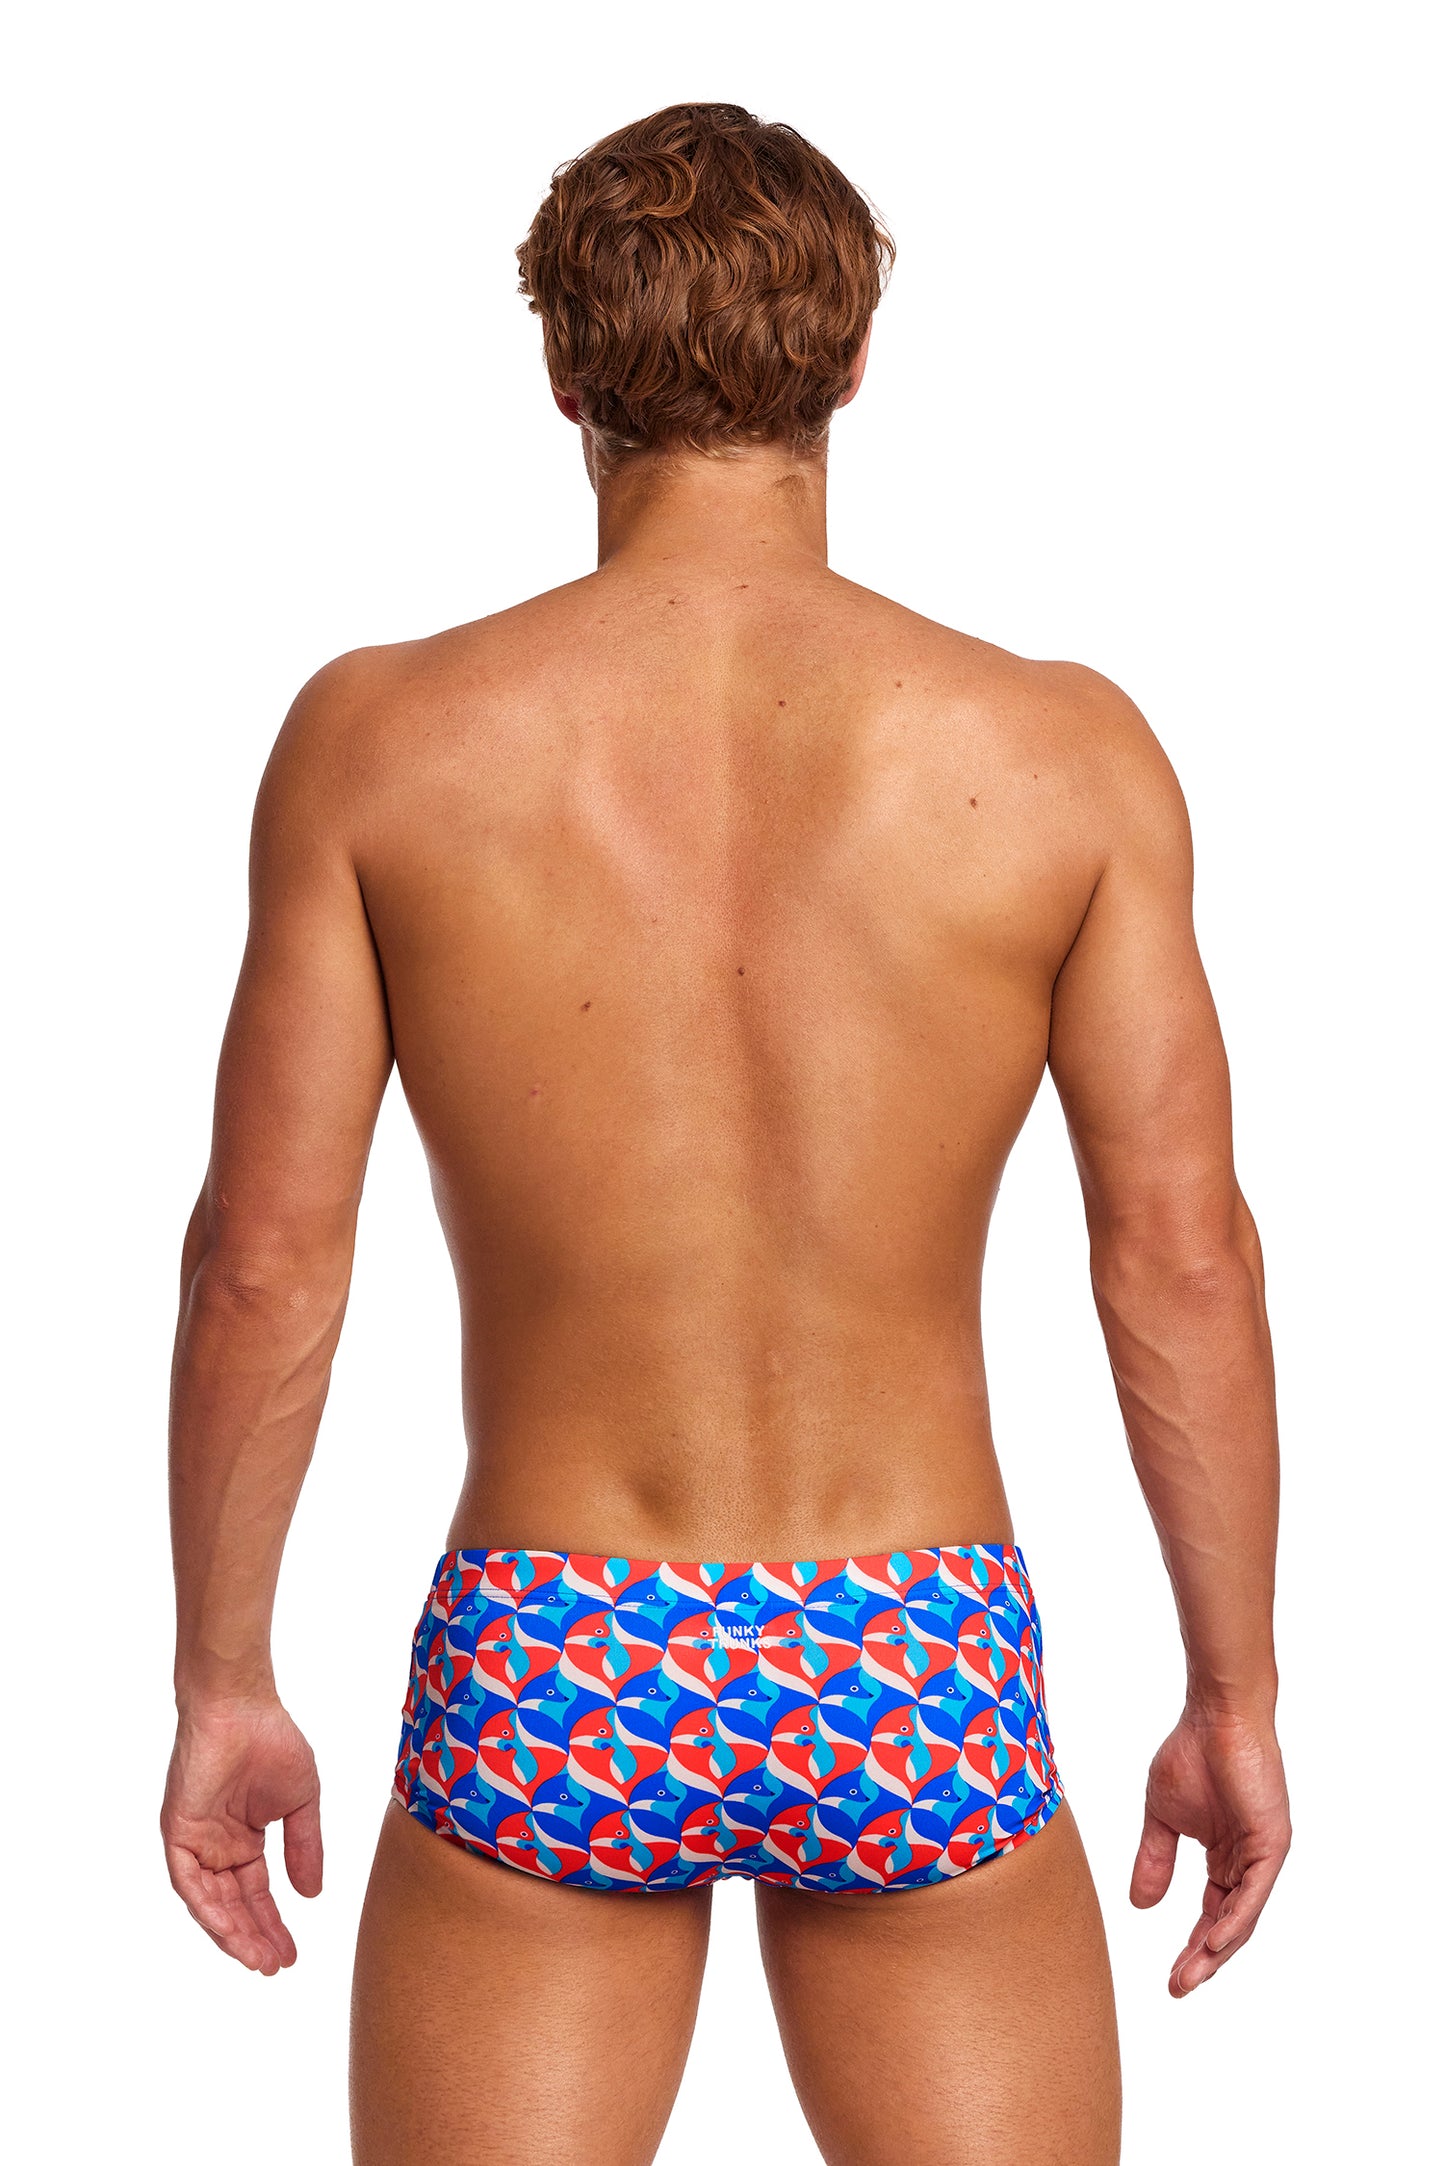 Funky Trunks Out Foxed Men’s Classic Trunks